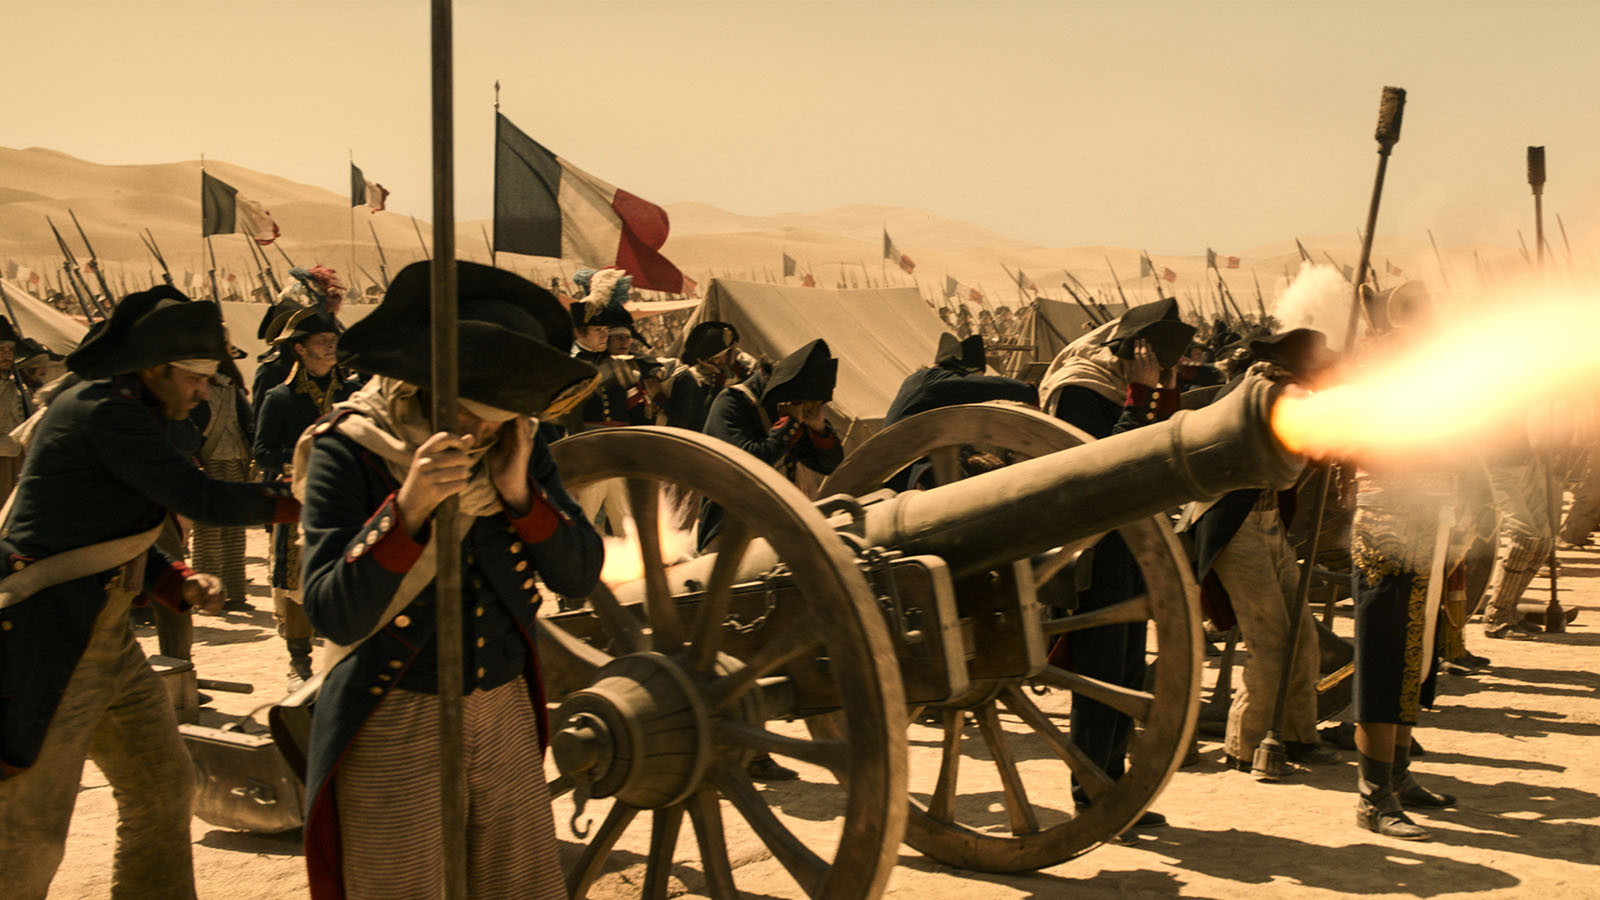 Napoleon's stunning visuals are matched by its explosive score. Image © Apple